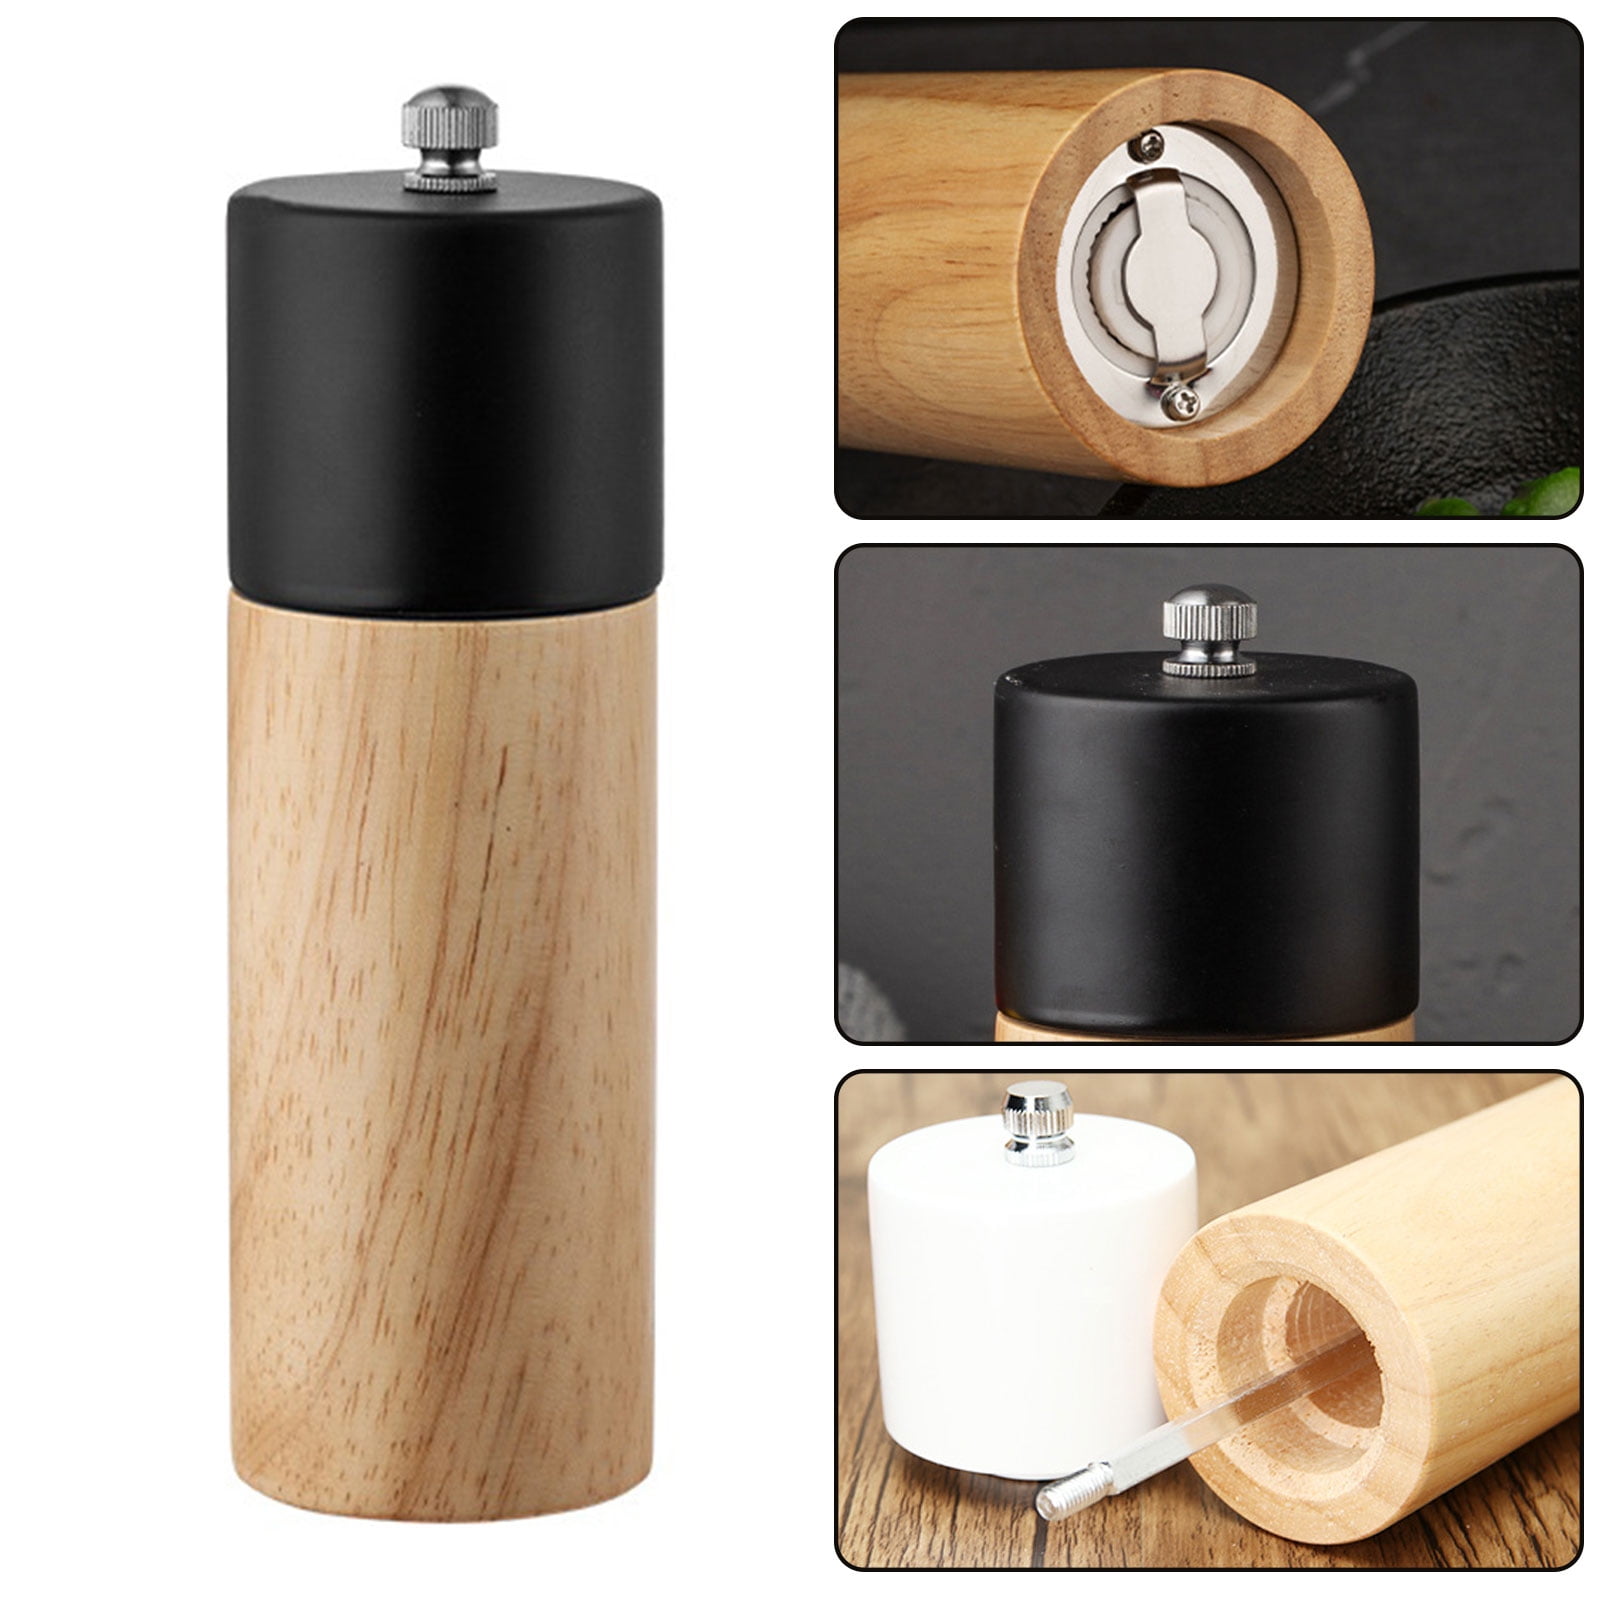 2" PORTABLE POCKET SIZED 2 PIECE SQUARE WOOD HERB TEA TOBACCO GRINDER SIFTER 